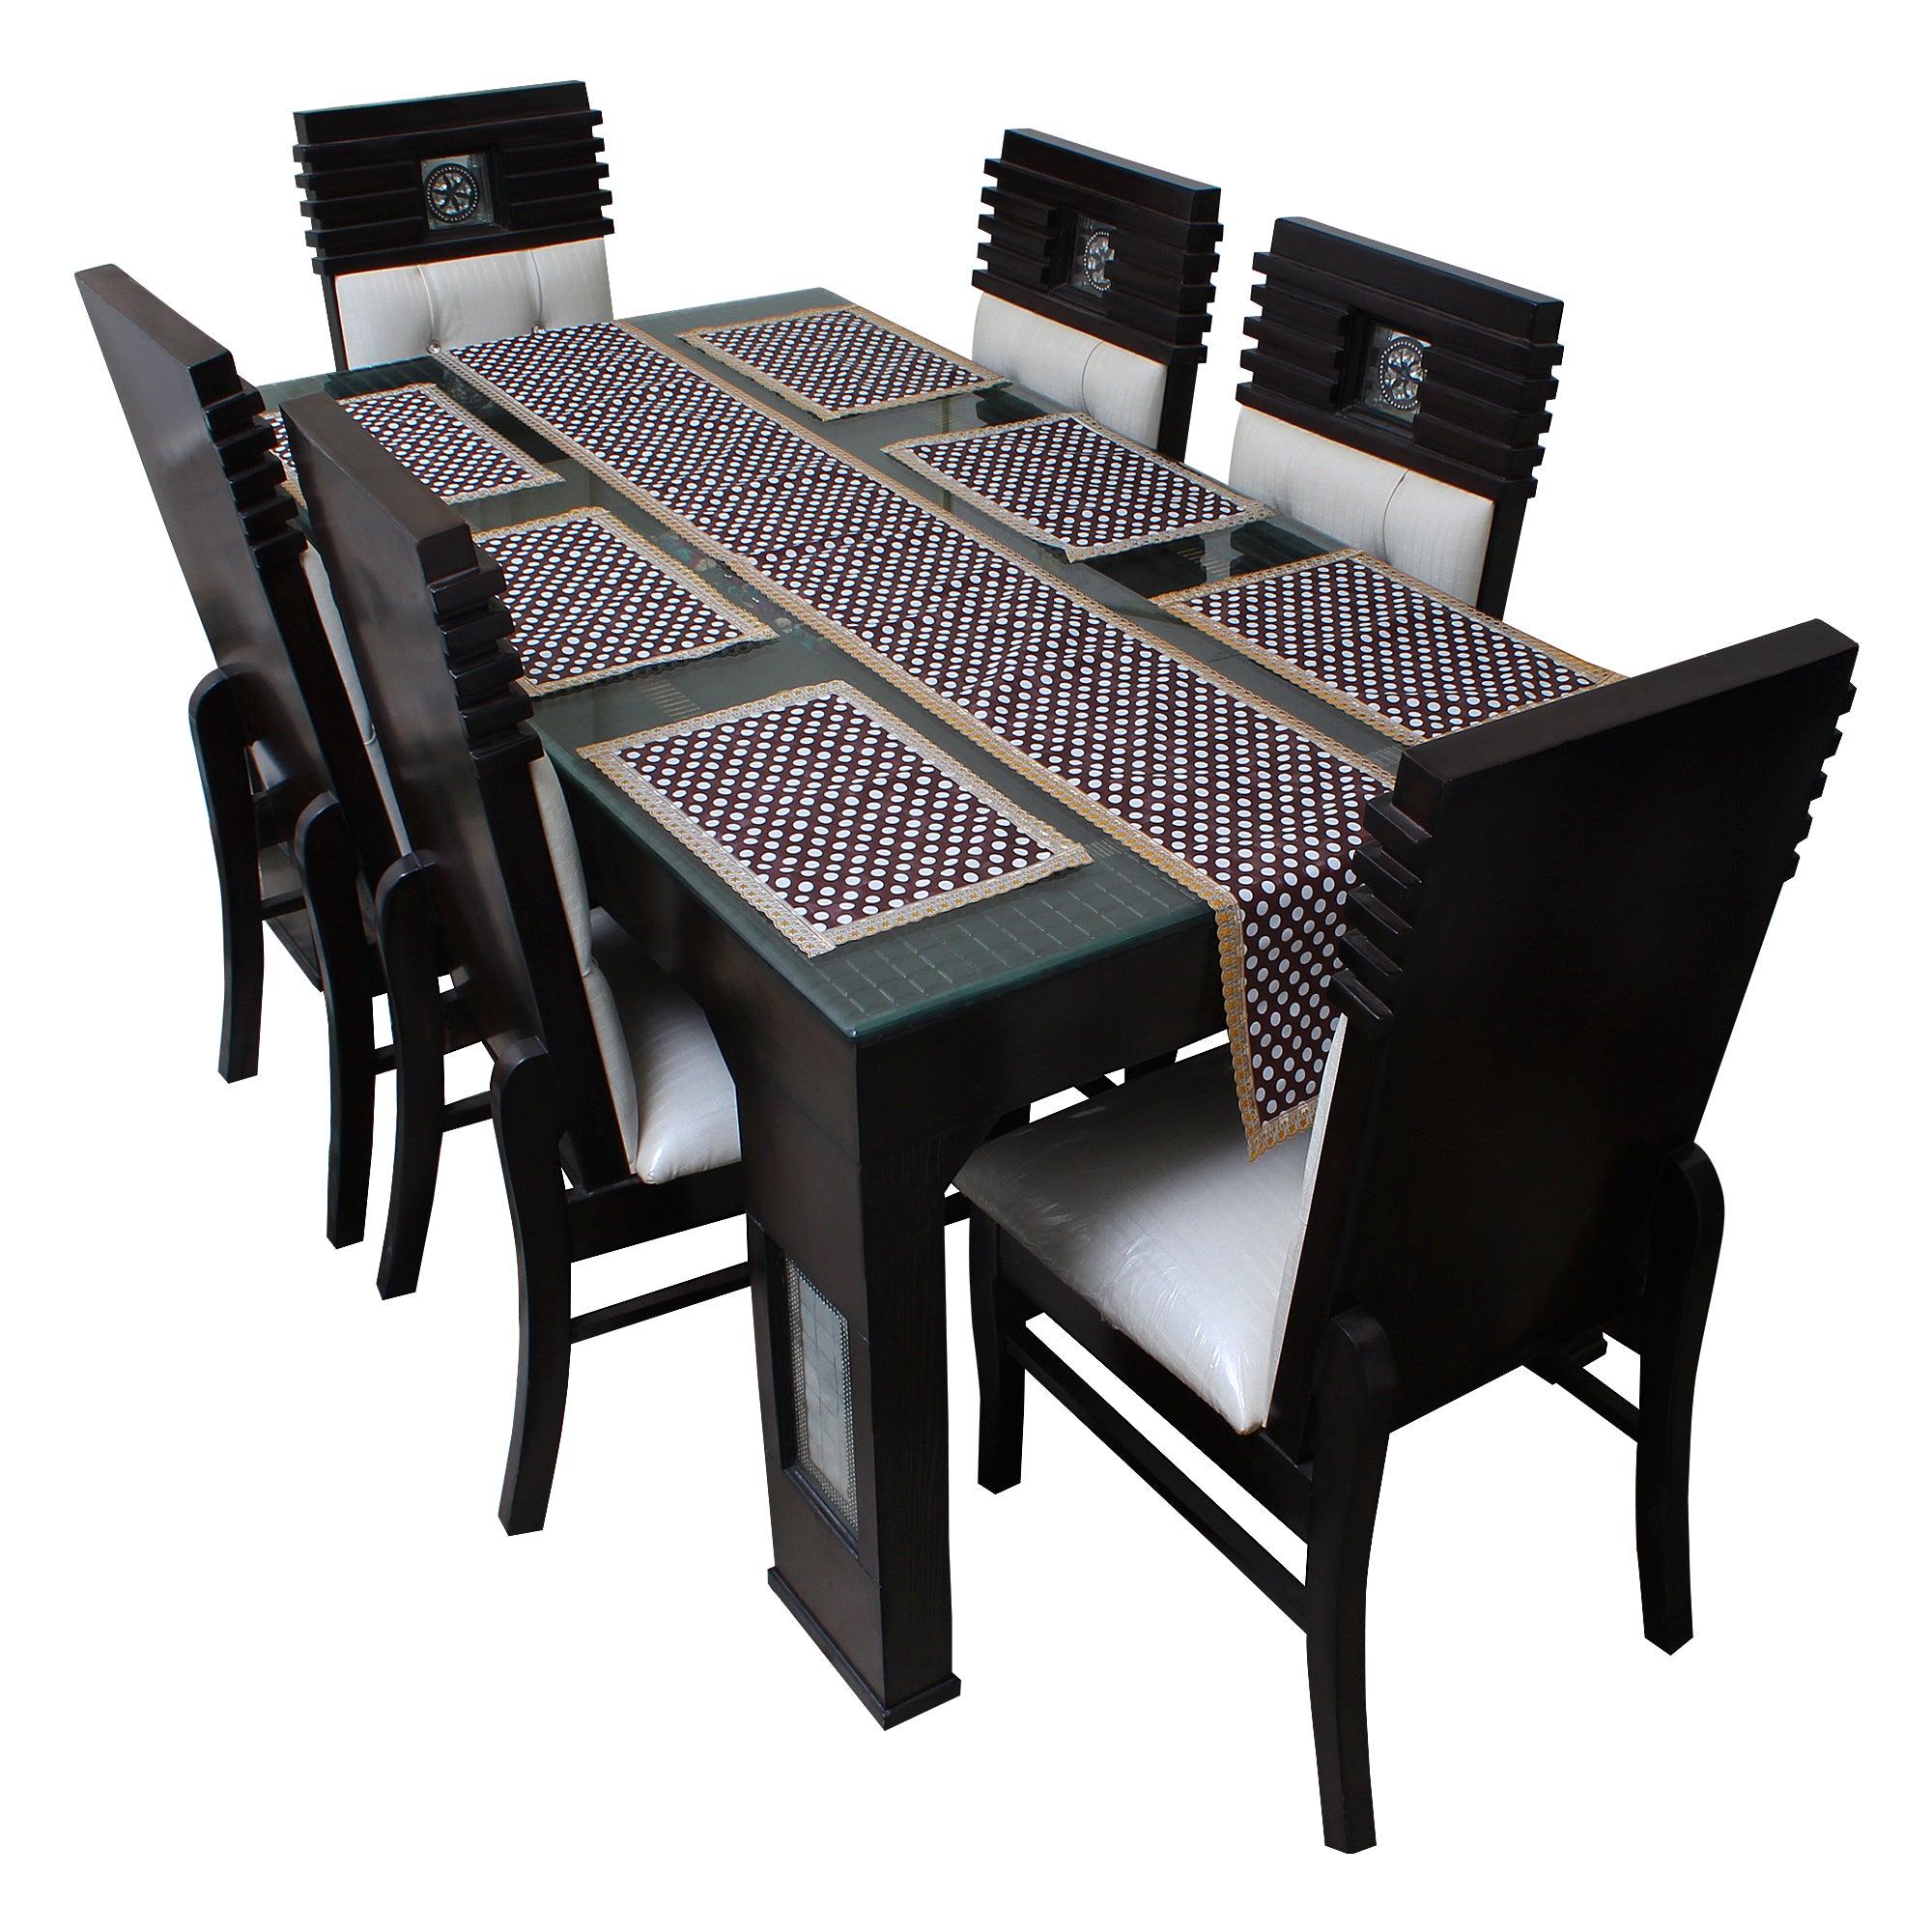 Waterproof & Dustproof Dining Table Runner With 6 Placemats, SA28 - Dream Care Furnishings Private Limited